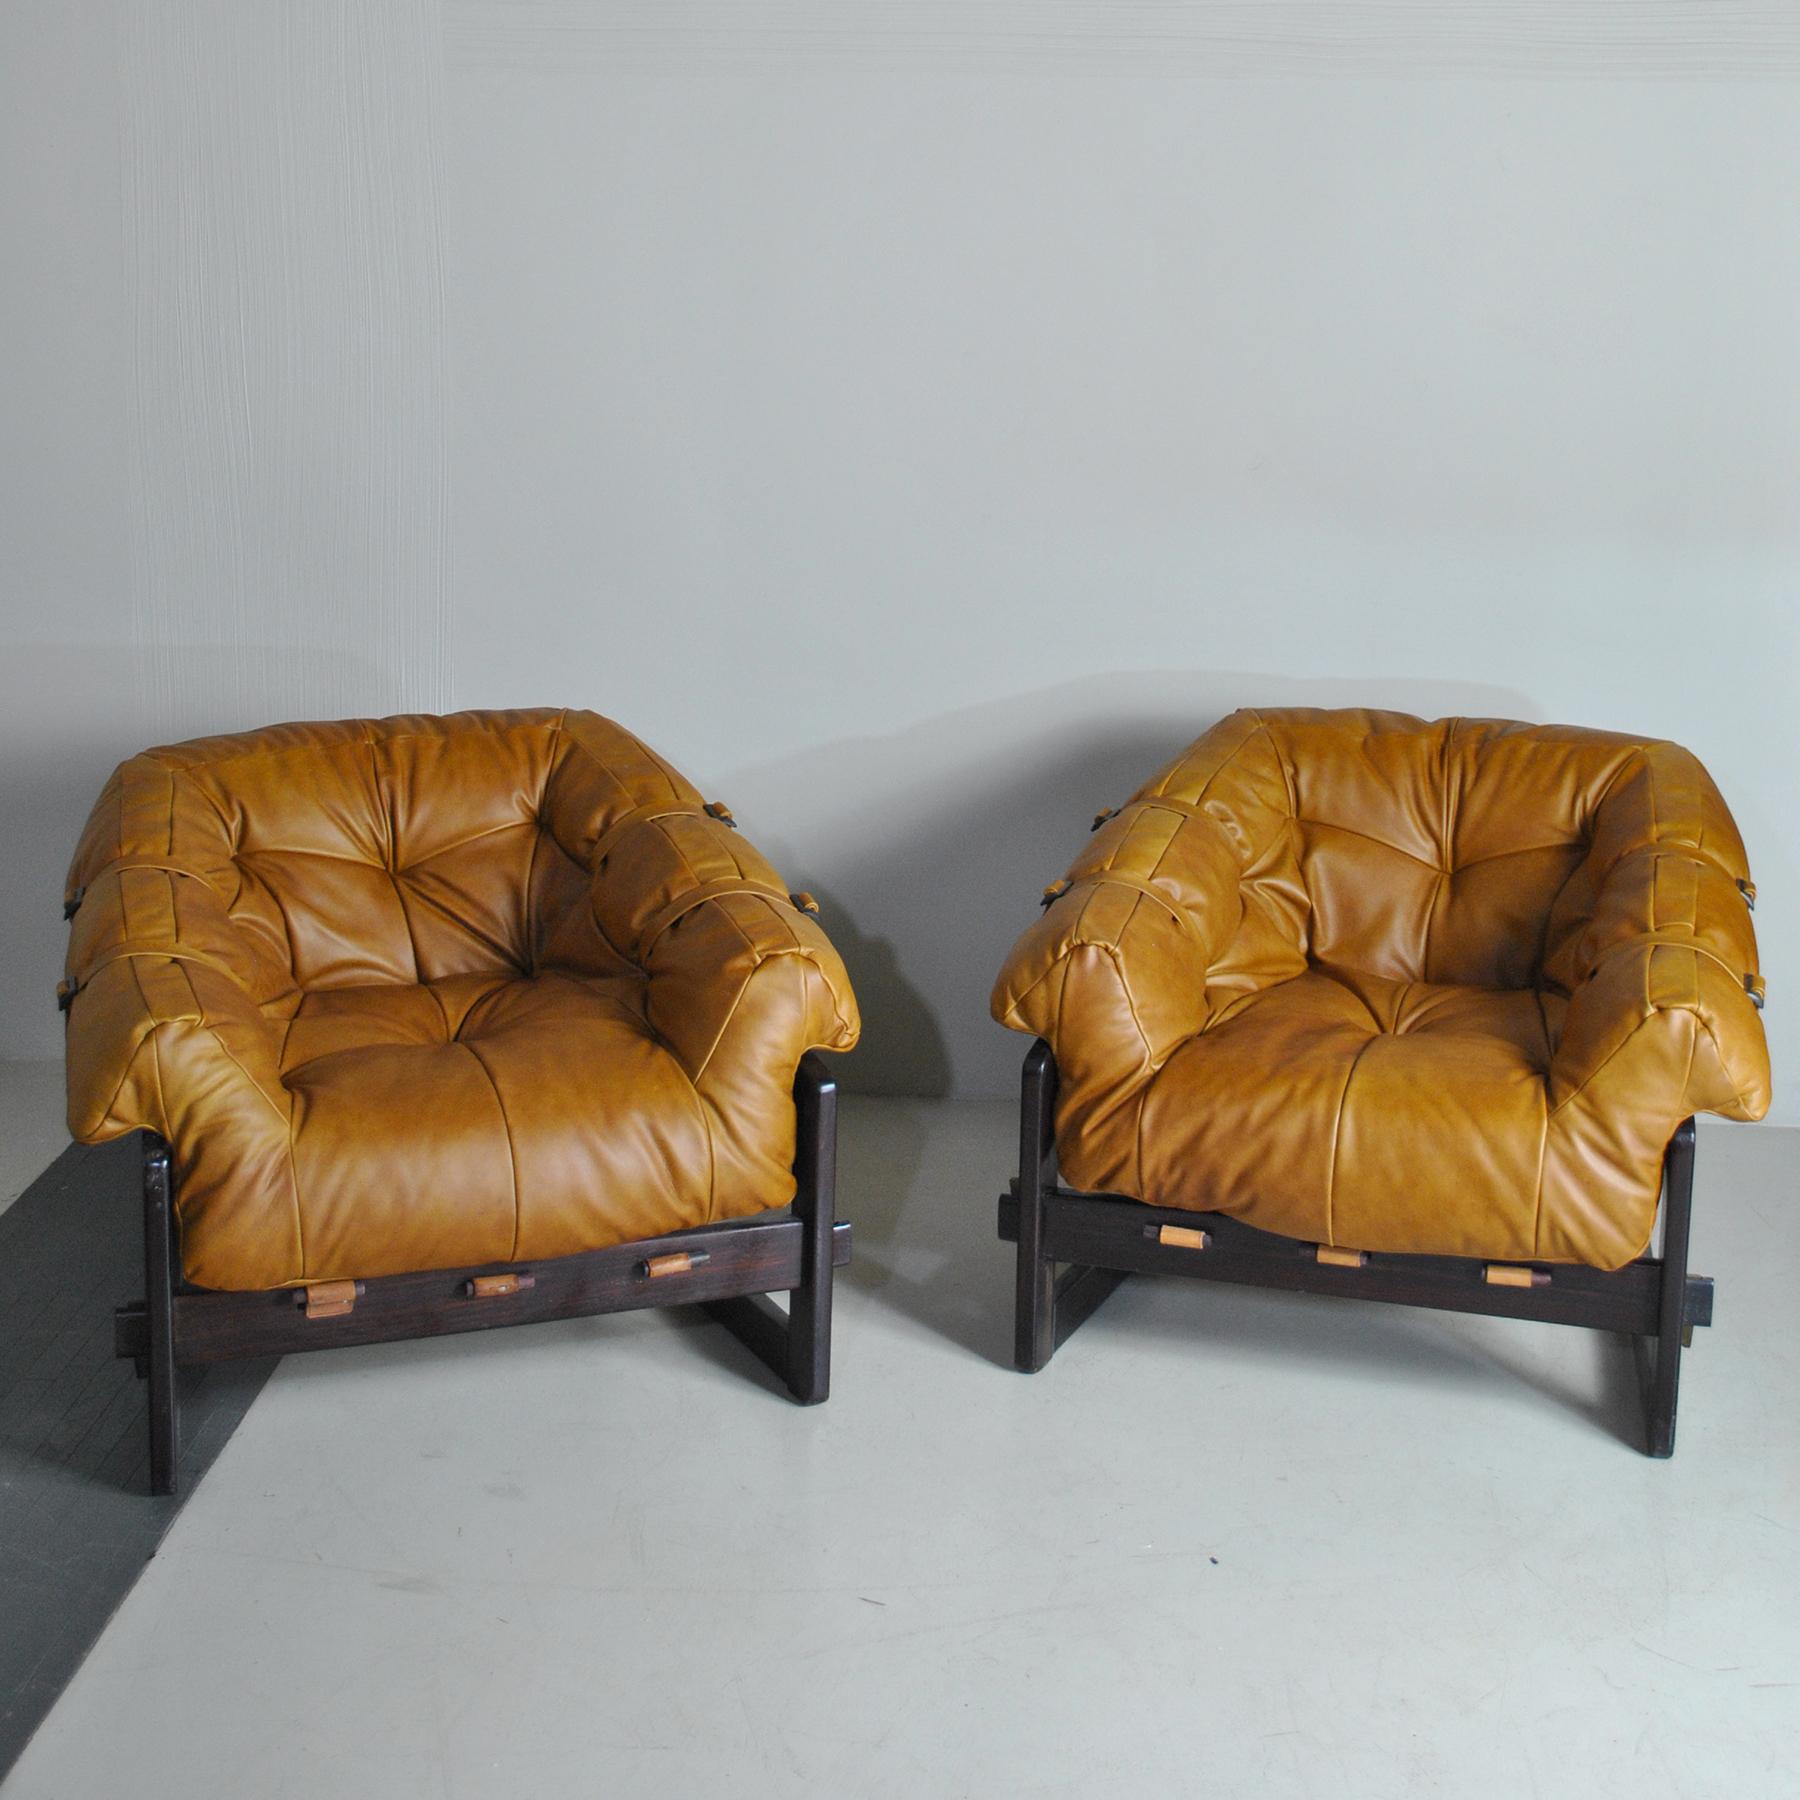 Mid-20th Century Percival Lafer Pair of Midcentury Brazilian Lounge Chair, 1960s